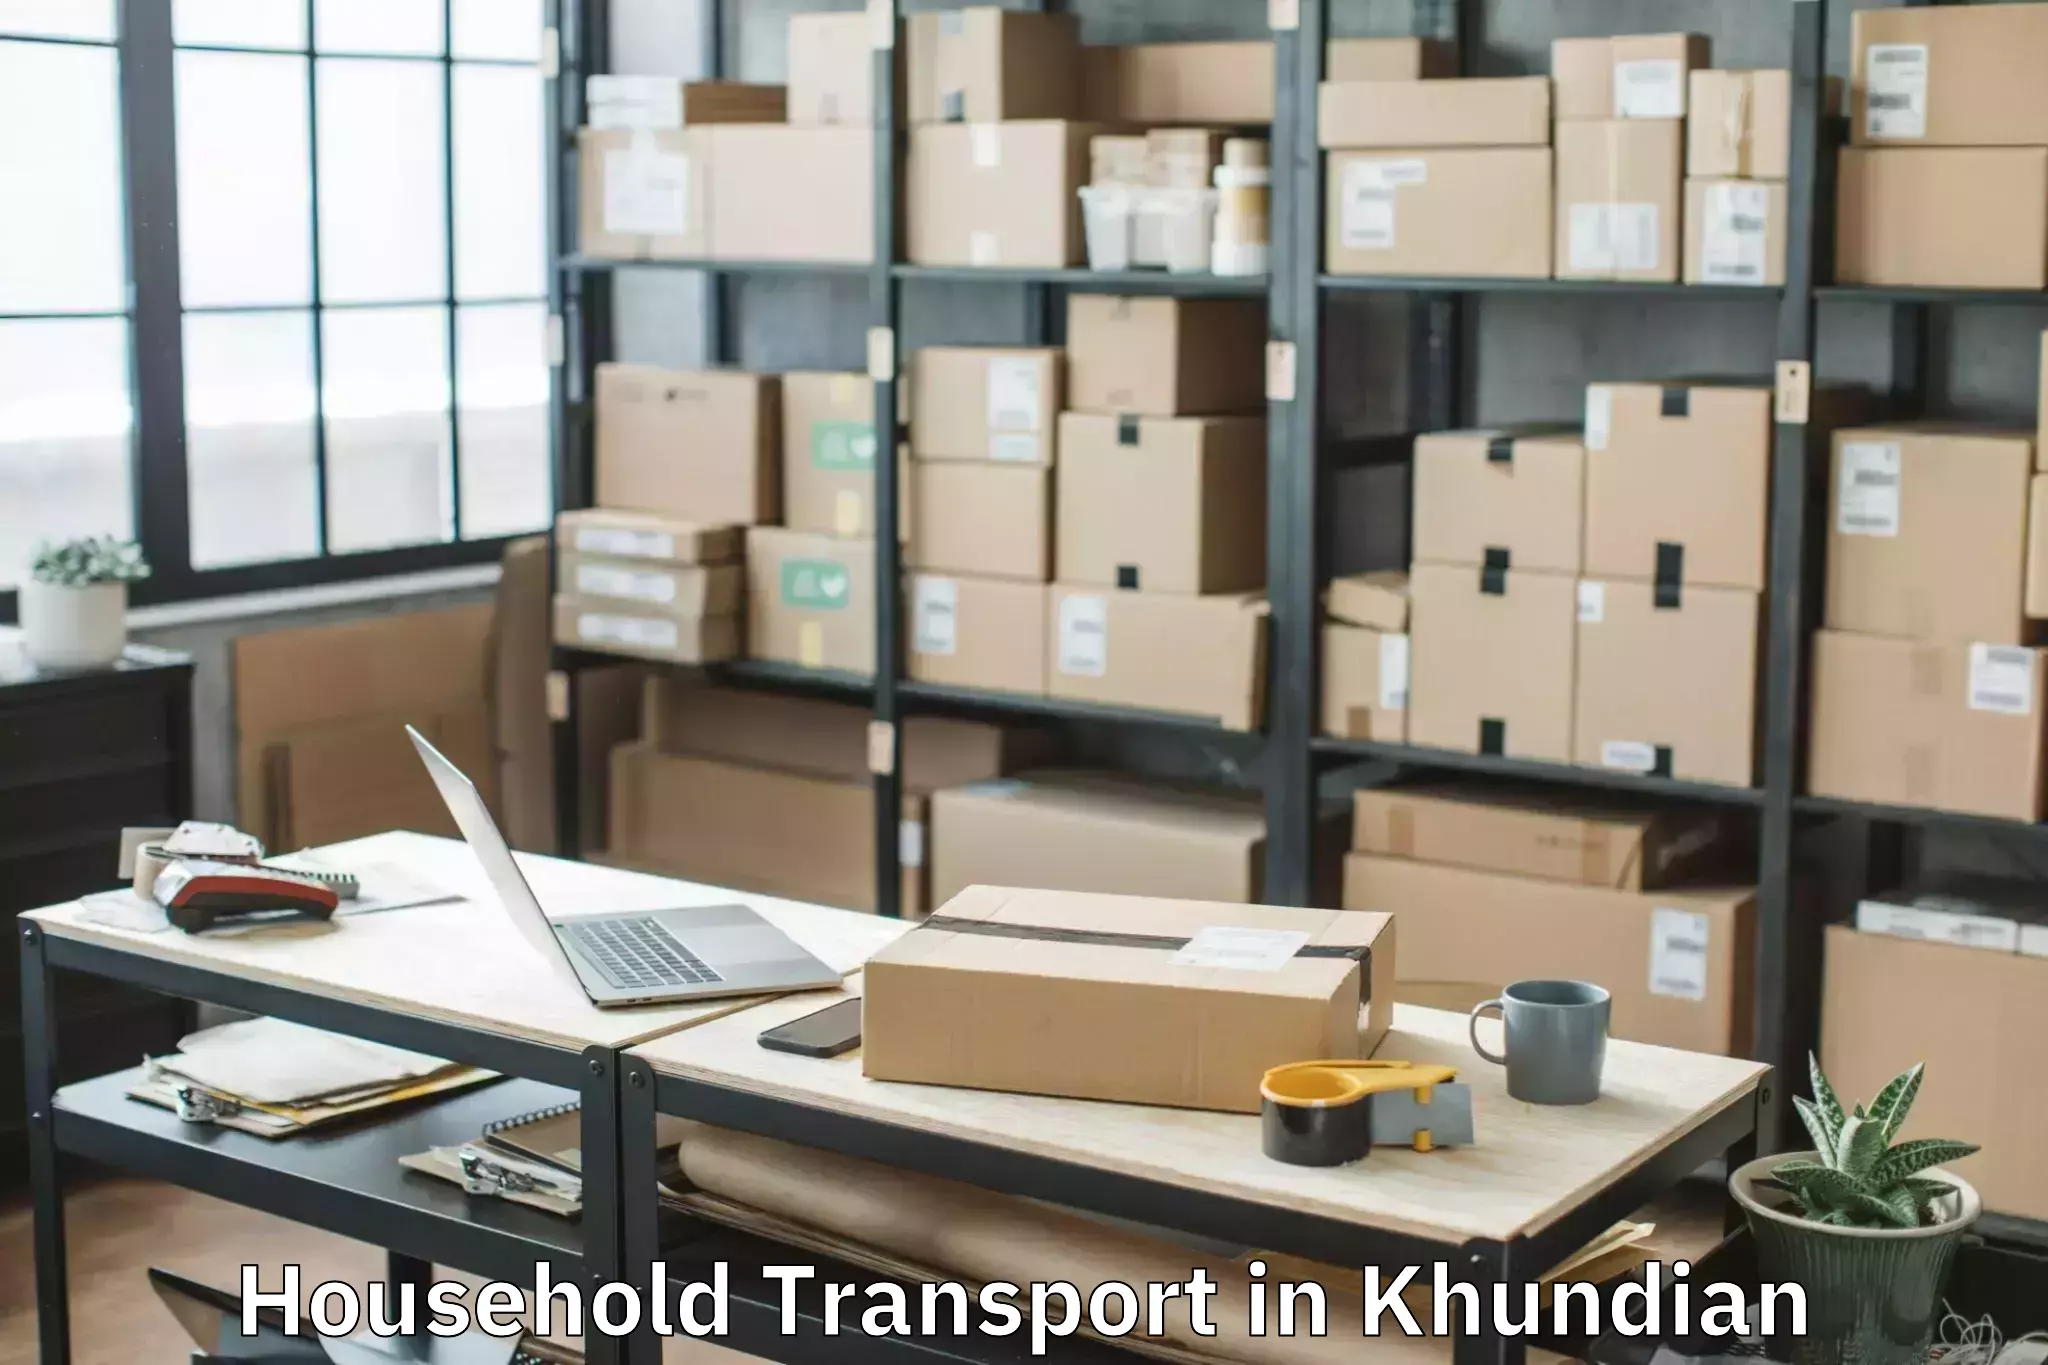 Quality relocation services in Khundian